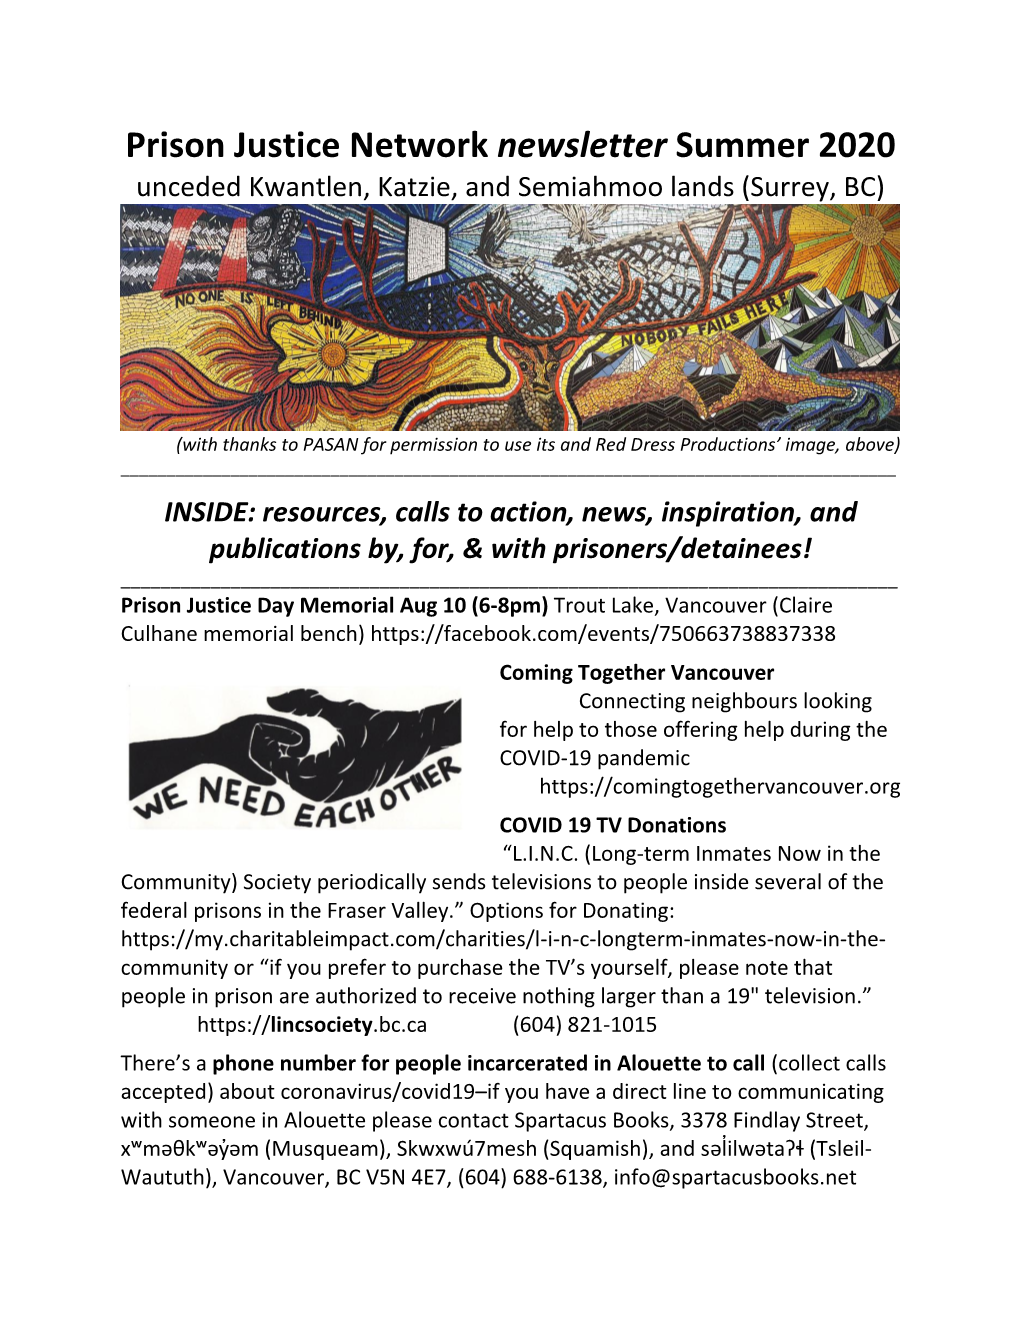 Prison Justice Network Newsletter Summer 2020 Unceded Kwantlen, Katzie, and Semiahmoo Lands (Surrey, BC)